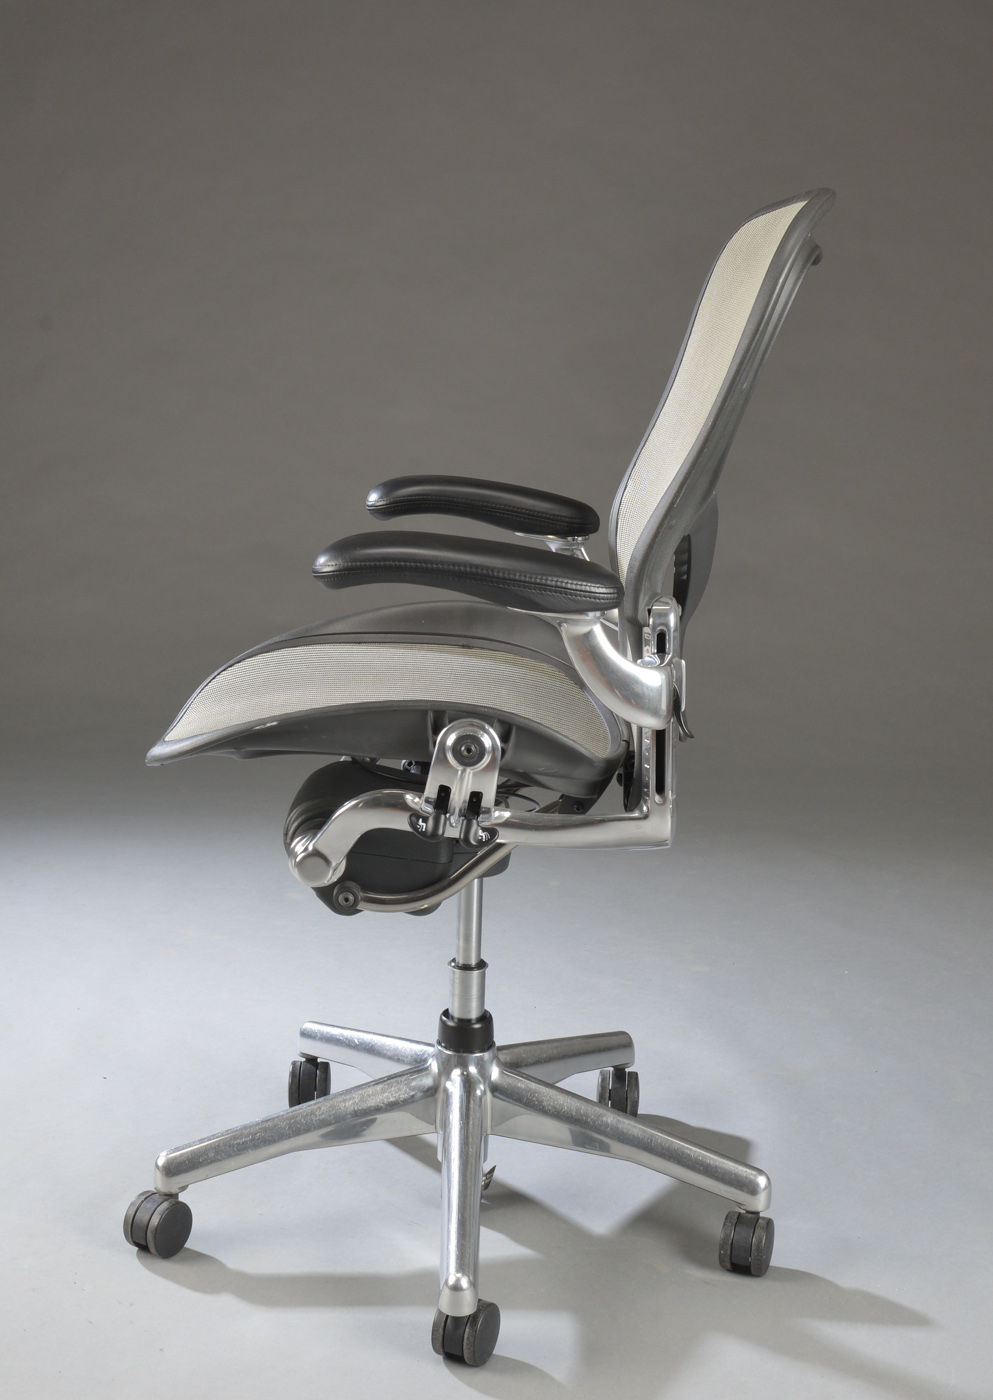 Donald Chadwick William Stump Office Chair In Polished Aluminium Multi Adjustable Office Chair Model Aeron C New Generation This Lot Has Been Put Up For Resale Under The New Lot No 4851464